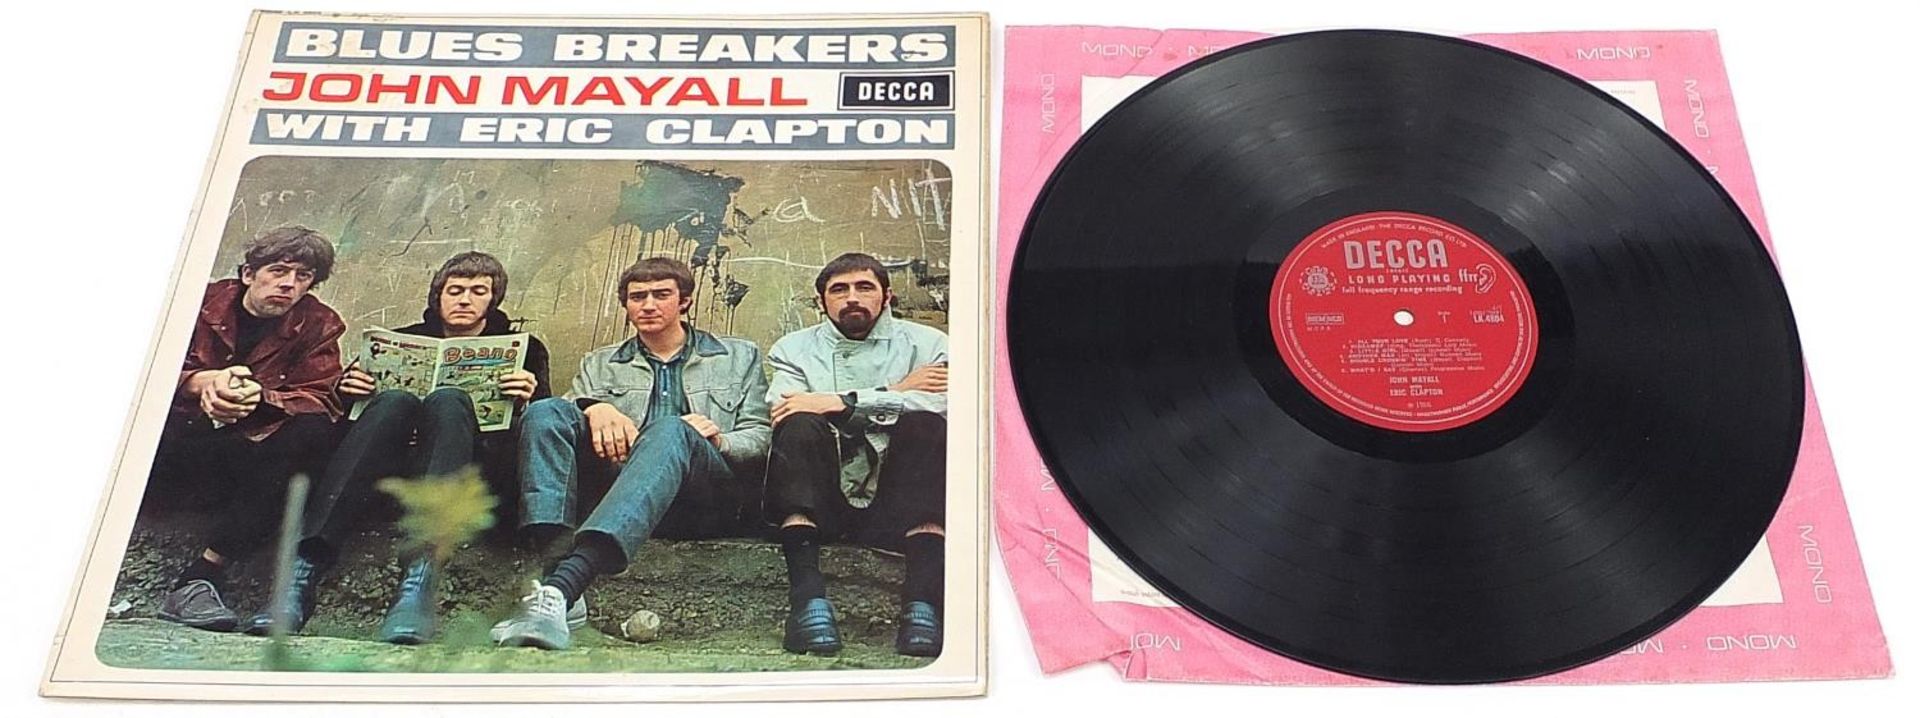 Two Blues Breakers vinyl LP records by John Mayall with Beano covers, each mono LK4804 - Image 4 of 5